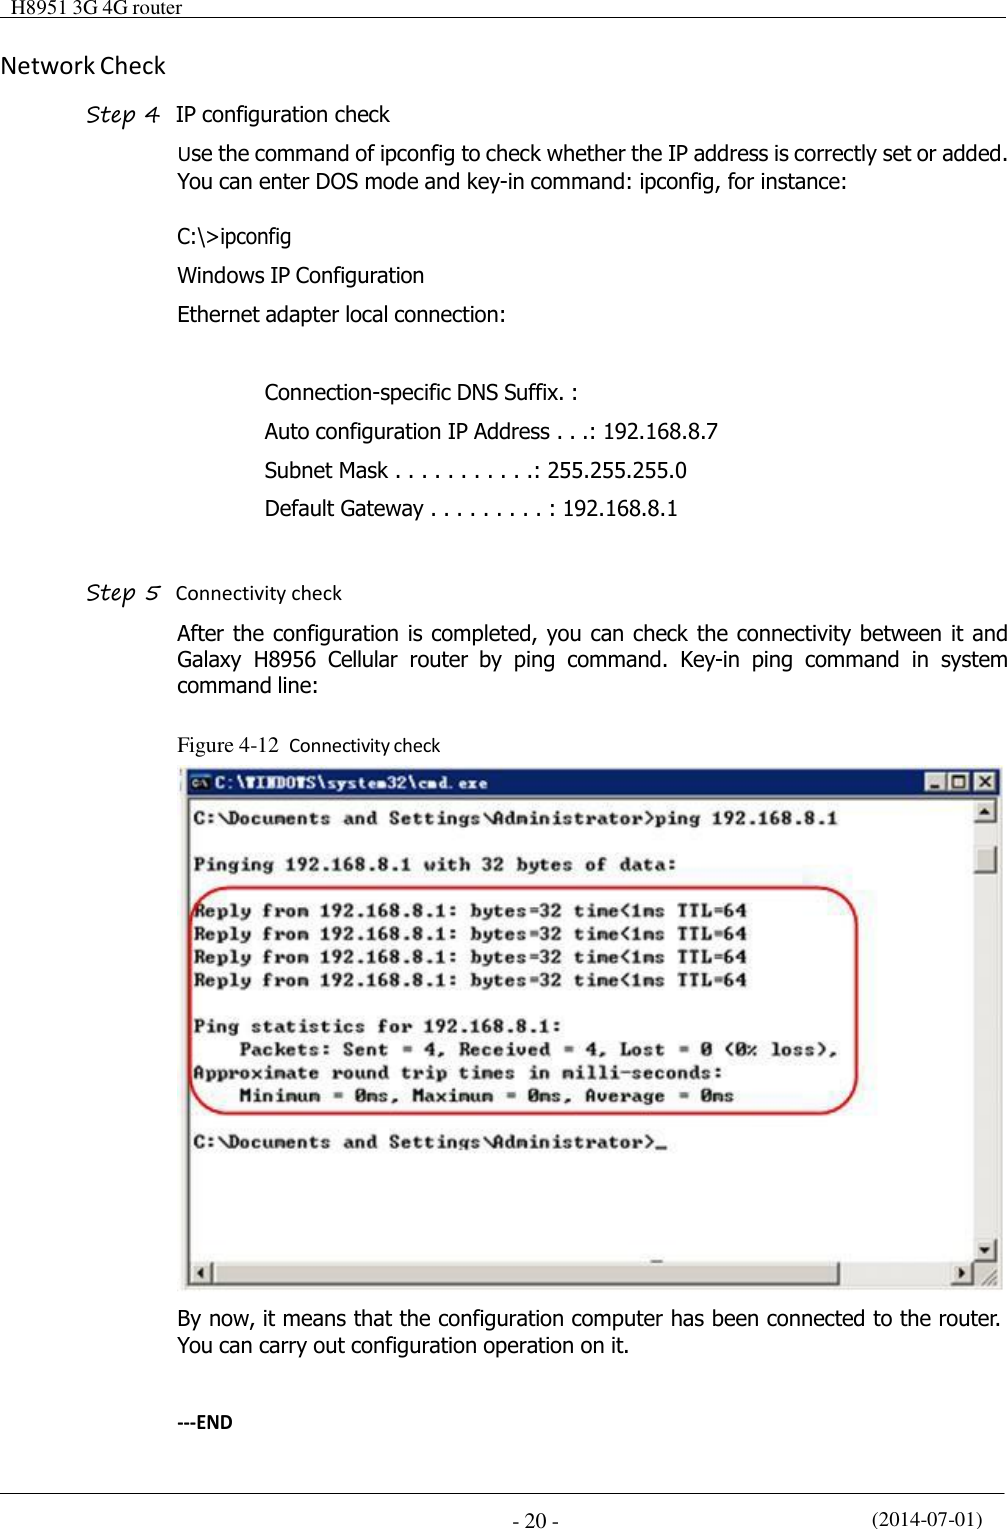  H8951 3G 4G router    (2014-07-01) - 20 -    Network Check  Step 4  IP configuration check Use the command of ipconfig to check whether the IP address is correctly set or added. You can enter DOS mode and key-in command: ipconfig, for instance:  C:\&gt;ipconfig  Windows IP Configuration  Ethernet adapter local connection:   Connection-specific DNS Suffix. :  Auto configuration IP Address . . .: 192.168.8.7 Subnet Mask . . . . . . . . . . .: 255.255.255.0 Default Gateway . . . . . . . . . : 192.168.8.1   Step 5  Connectivity check After the configuration is completed, you can check the connectivity between it and Galaxy  H8956  Cellular  router  by  ping  command.  Key-in  ping  command  in  system command line:   Figure 4-12  Connectivity check   By now, it means that the configuration computer has been connected to the router. You can carry out configuration operation on it.   ---END 